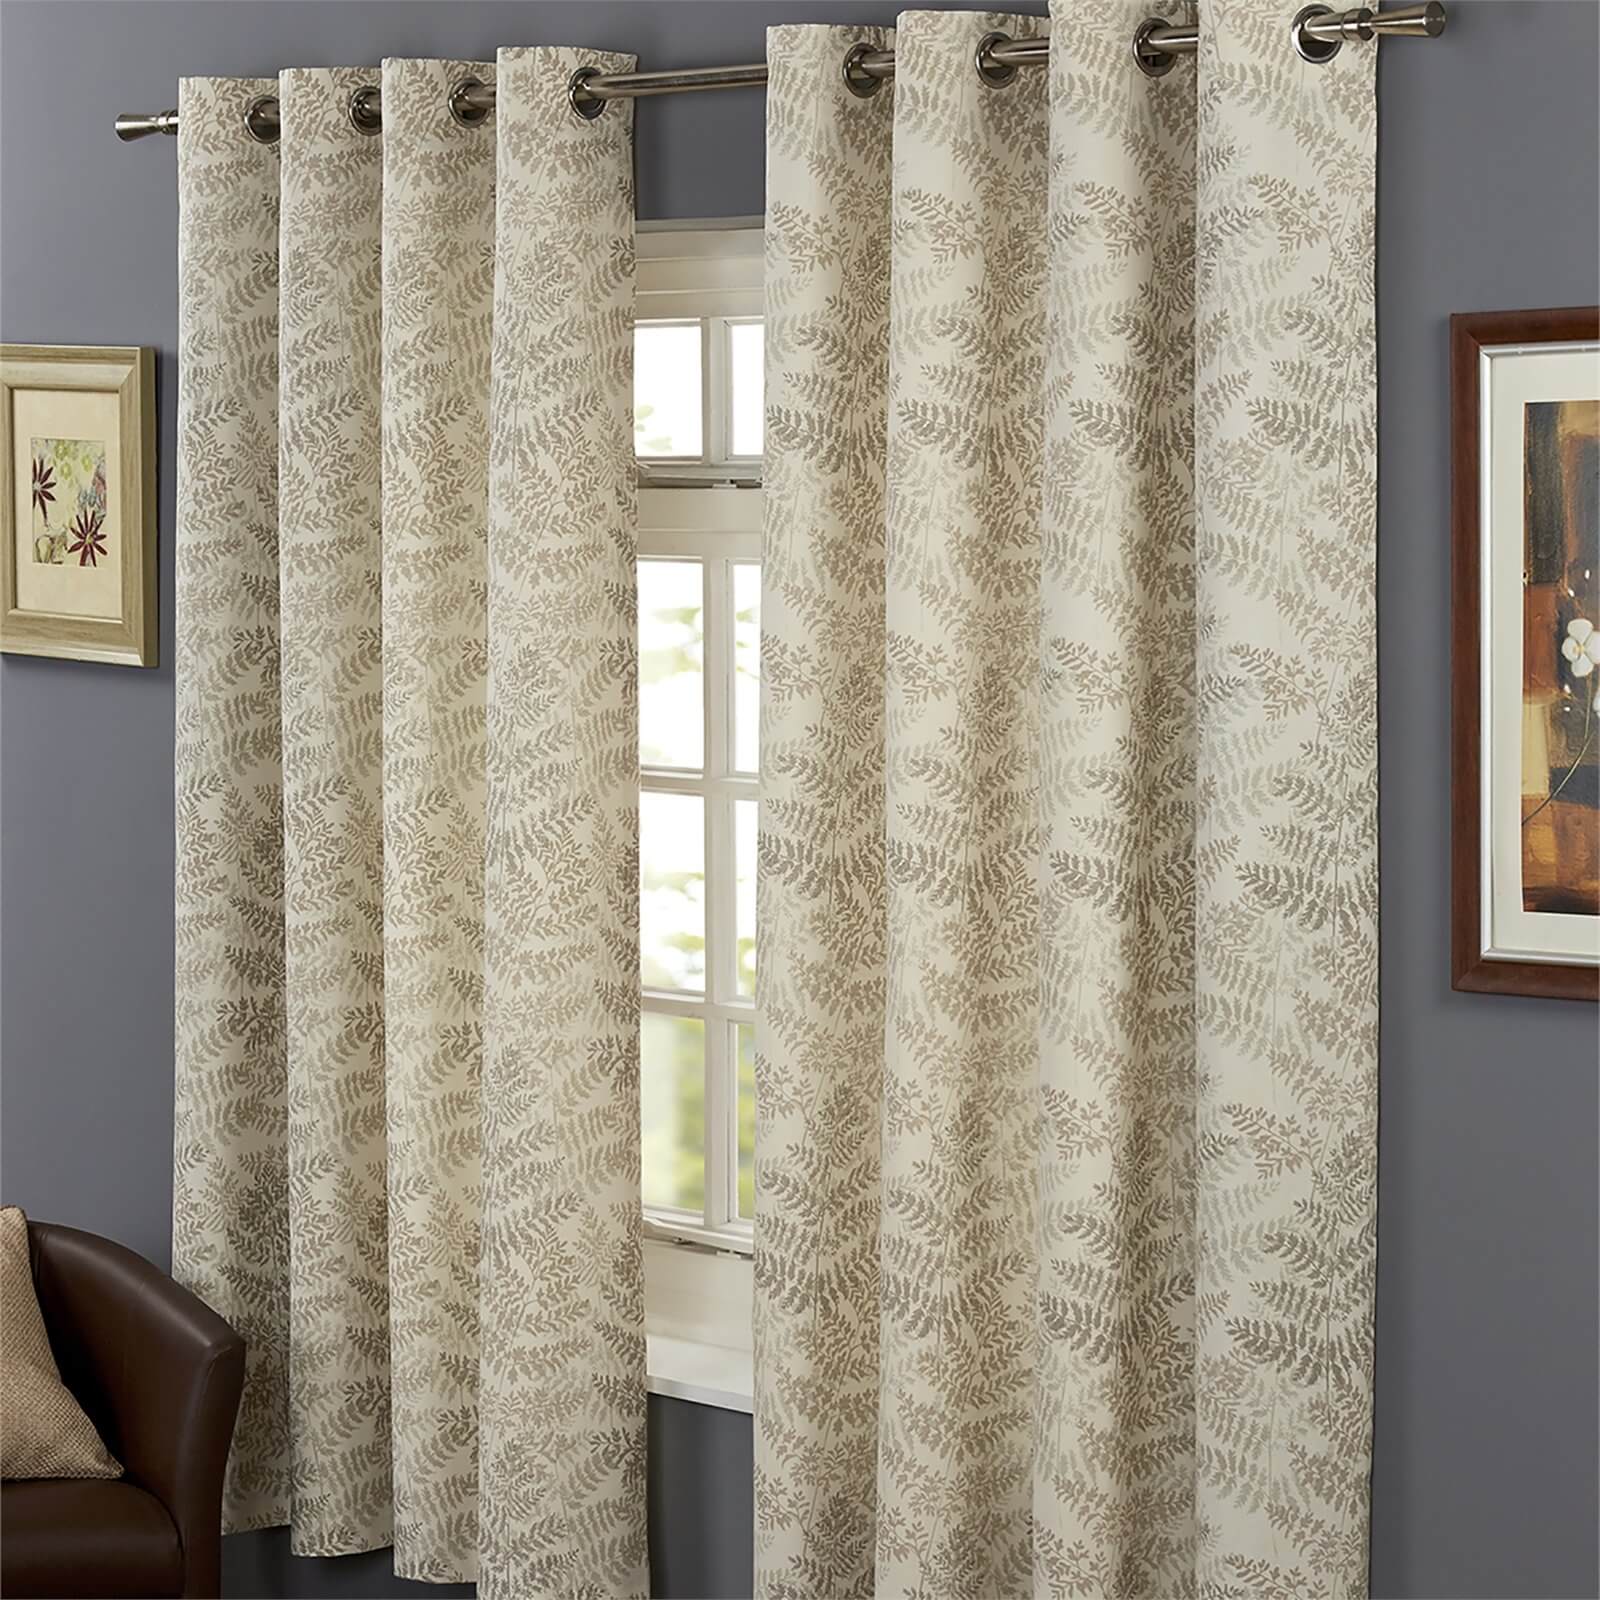 Hedgerow Lined 100% Cotton Eyelet Curtains 90 x 90 - Natural